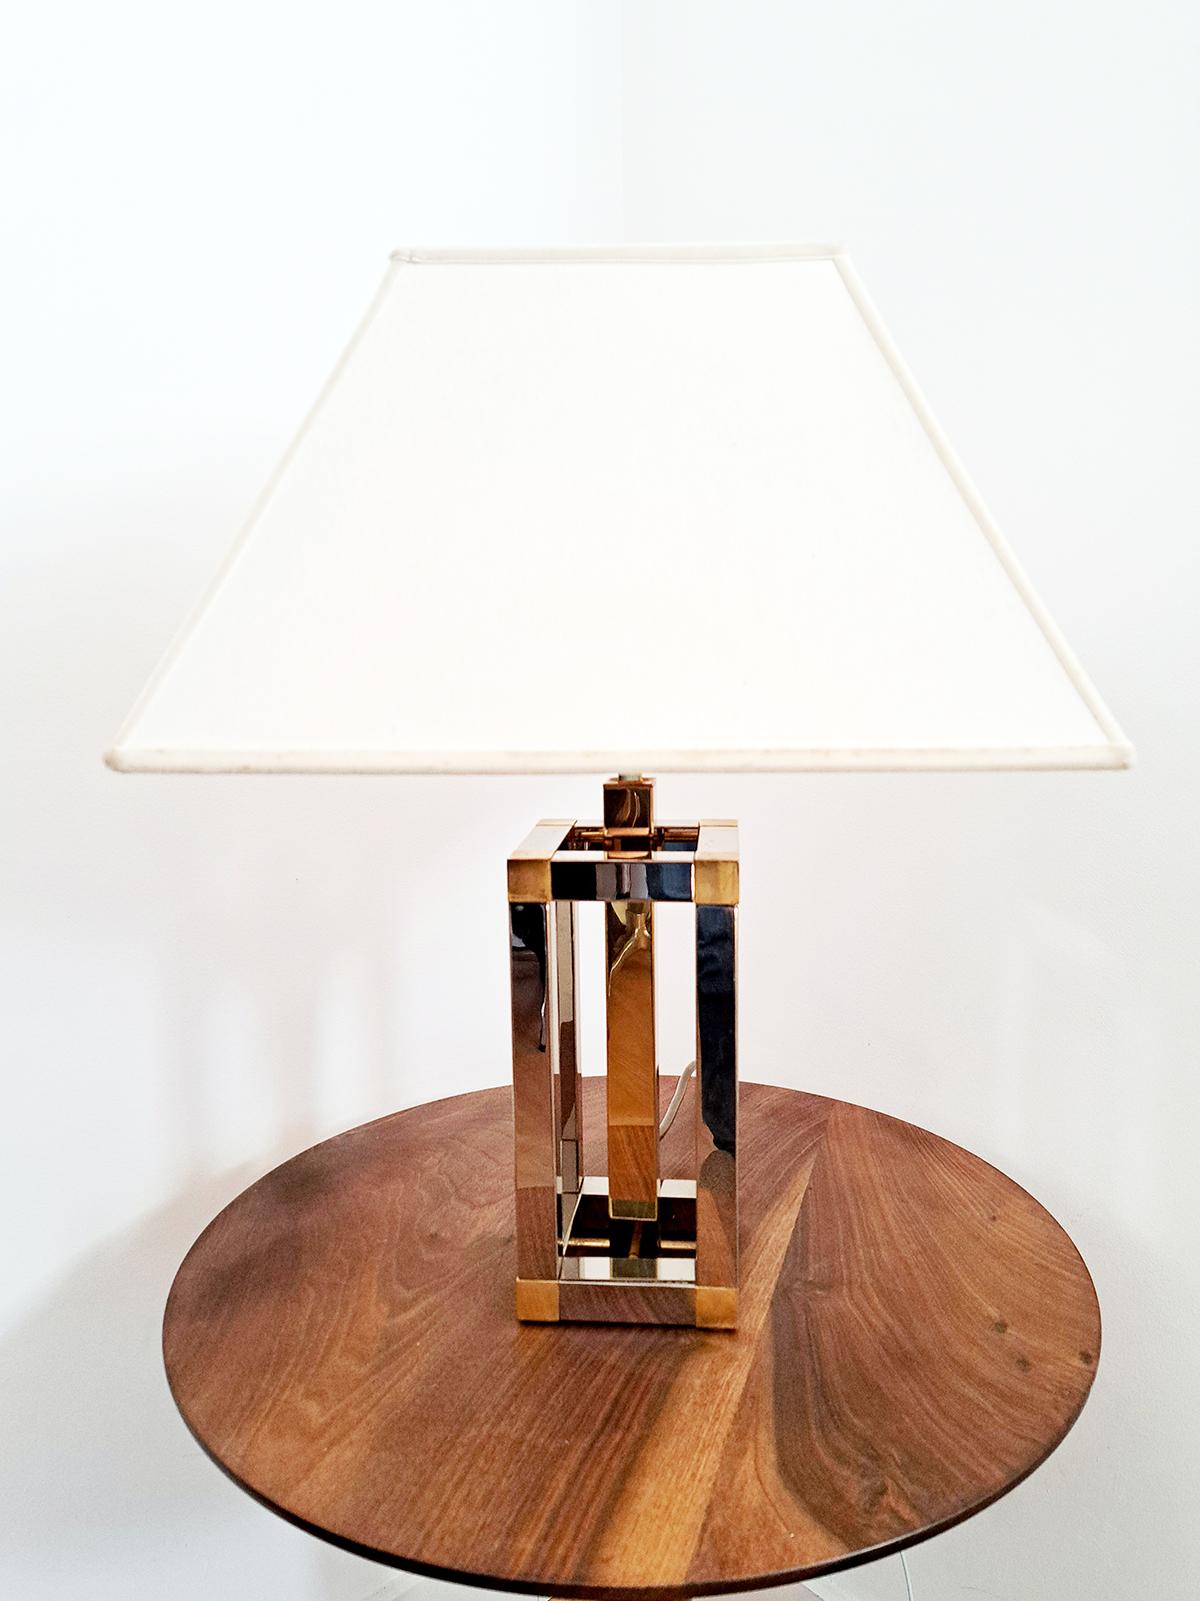 Decorative table Lamp attributed to Willy Rizzo, Italy, 1970s 
The geometric cube base is made of gold-plated and chromed metal.
The lamp is in good condition, with signs of age and use. Only the small one is available in the photo. Rewired using